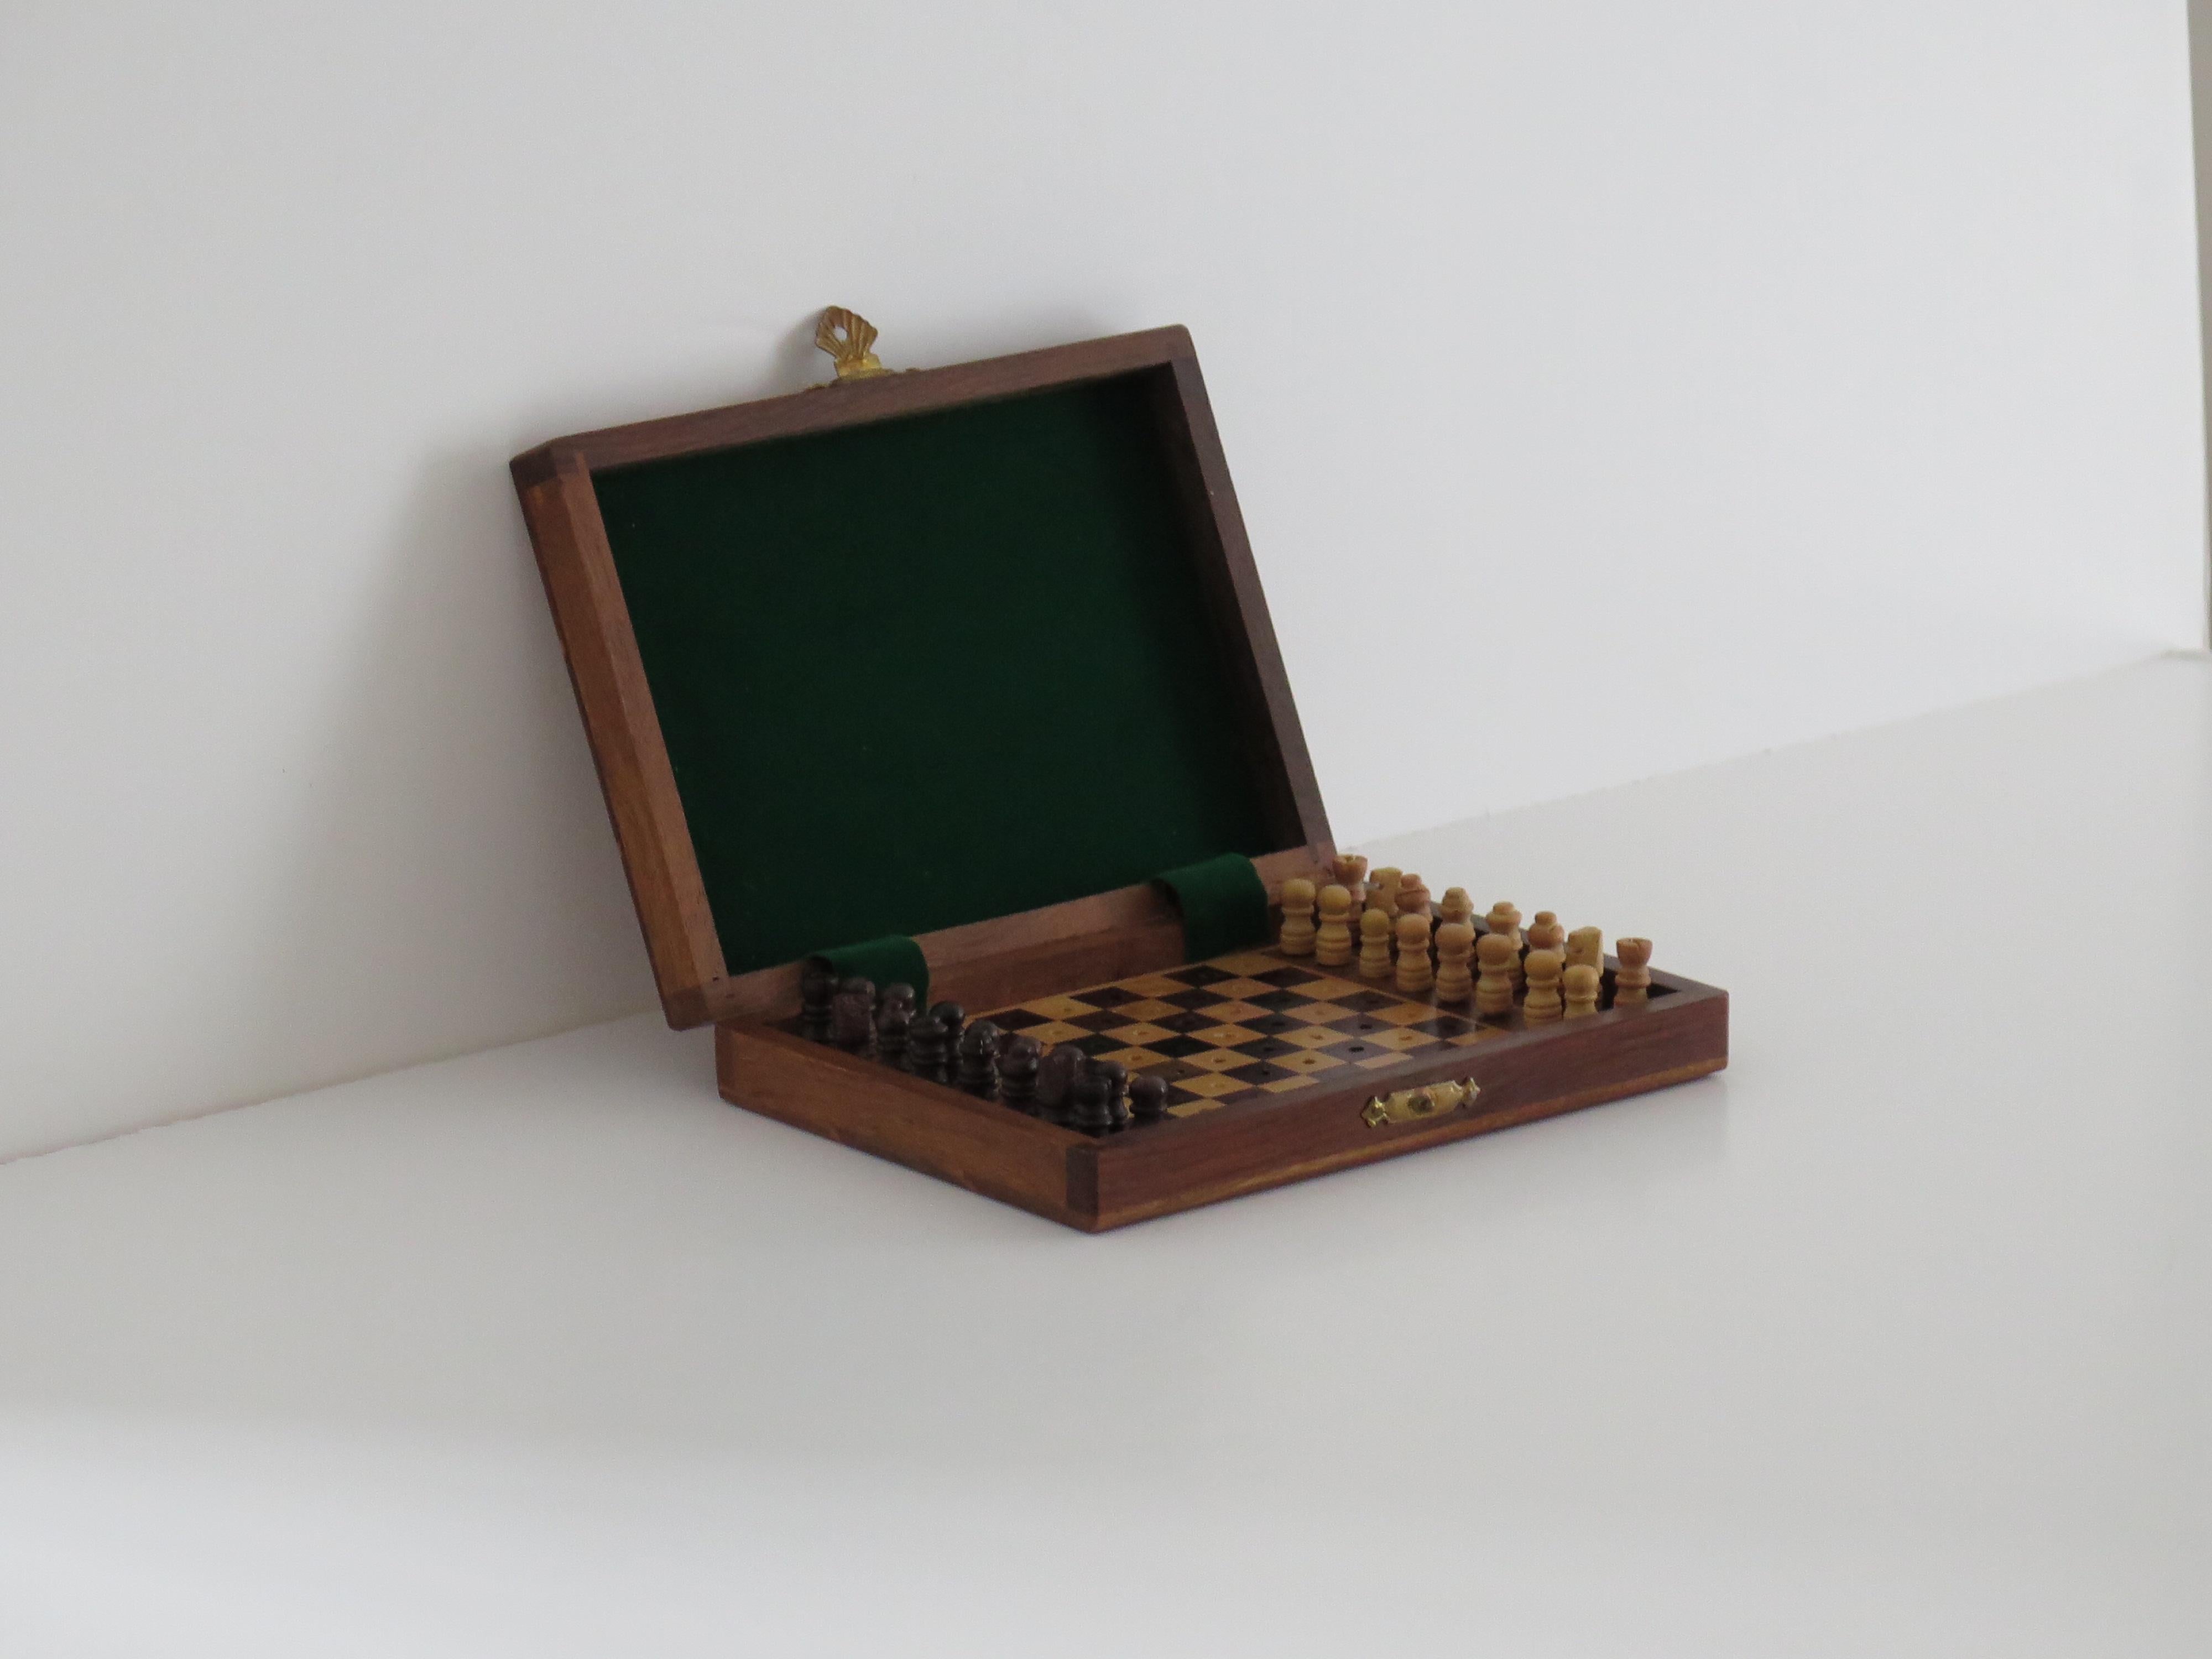 This is a good quality handmade Miniature or travelling wood chess set game of 32 pieces in its own inlaid hardwood box, which we date to the early 20th century, circa 1920.

This piece is all handmade. The chess set is complete with 32 wood pieces